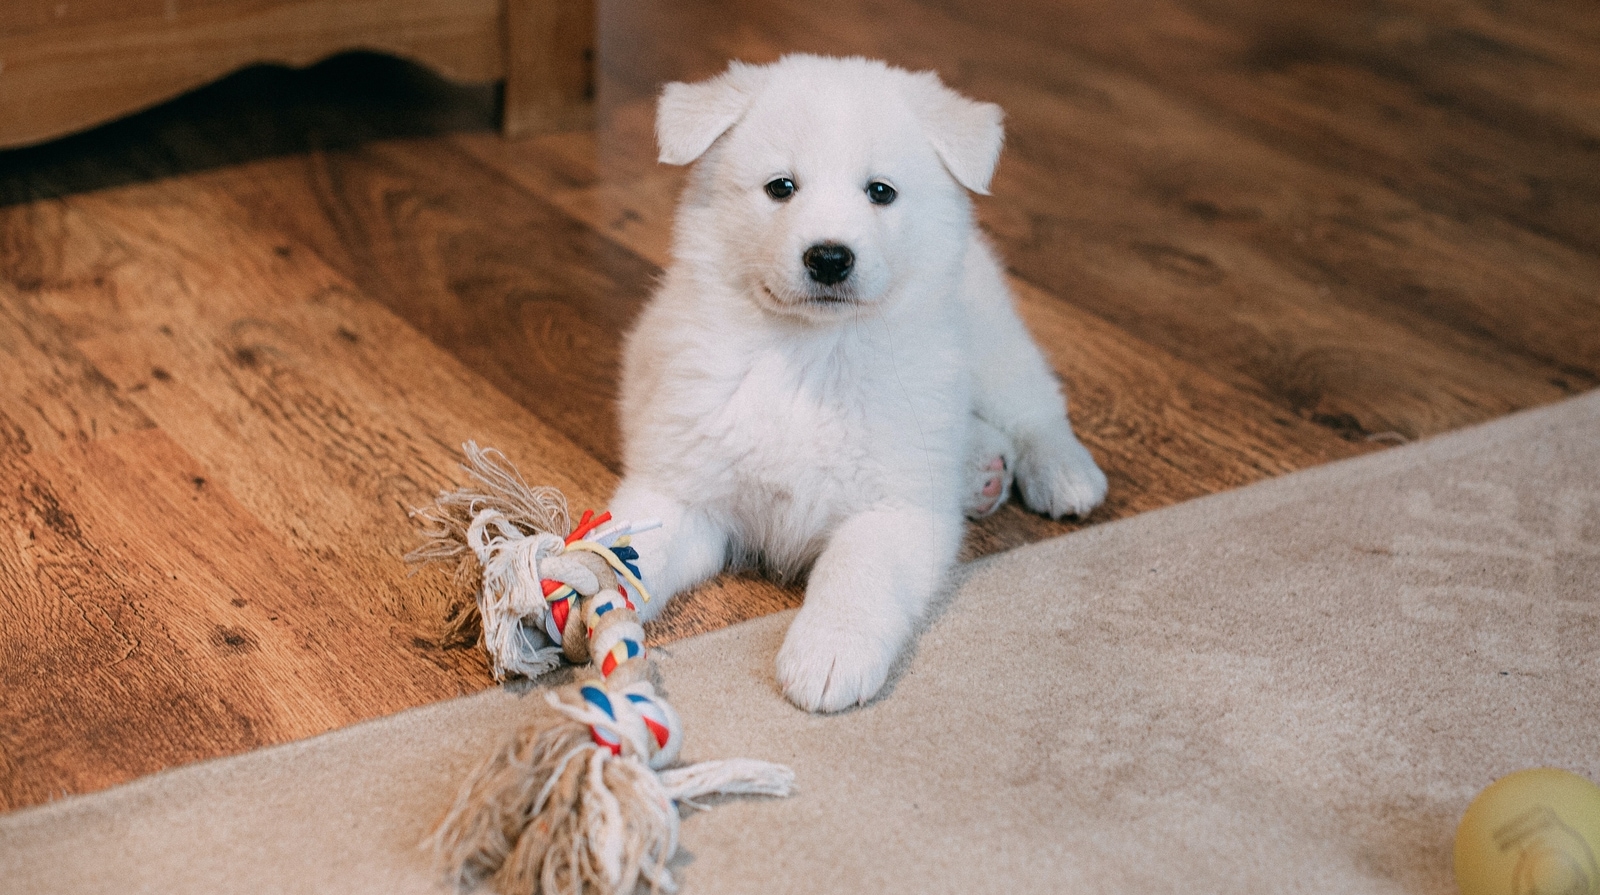 10 Best Dog Toys to Keep Your Puppy Busy, by Pets Lounge UAE, Apr, 2023, Medium